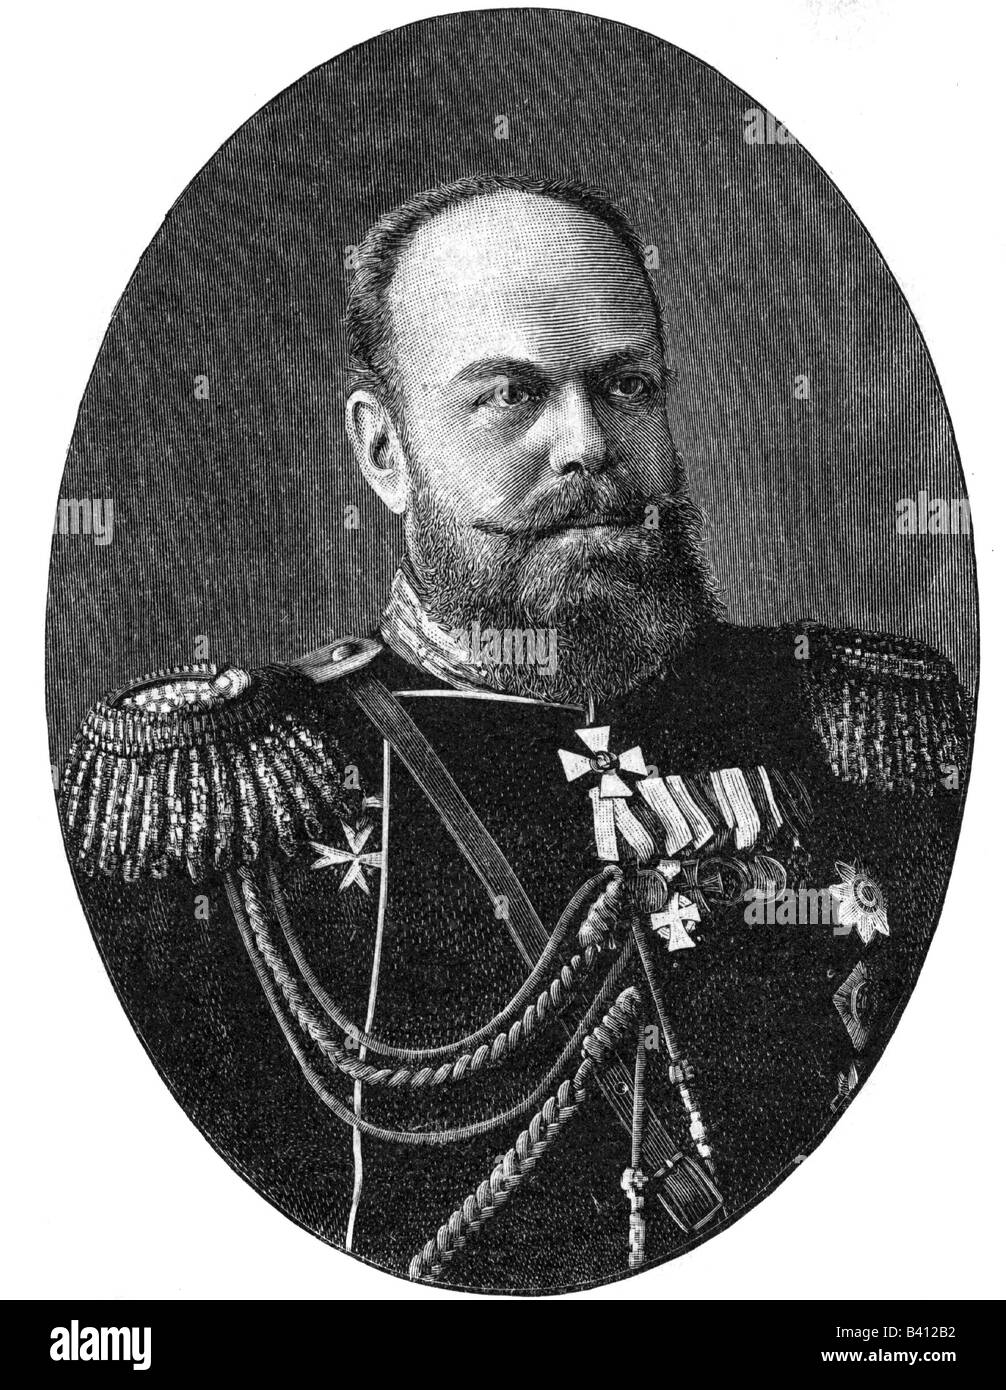 Alexander III Alexandrovich, 10.3.1845 - 1.11.1894, Emperor of Russia 1.3.1881 - 1.11.1894, portrait, wood engraving, late 19th century, , Stock Photo